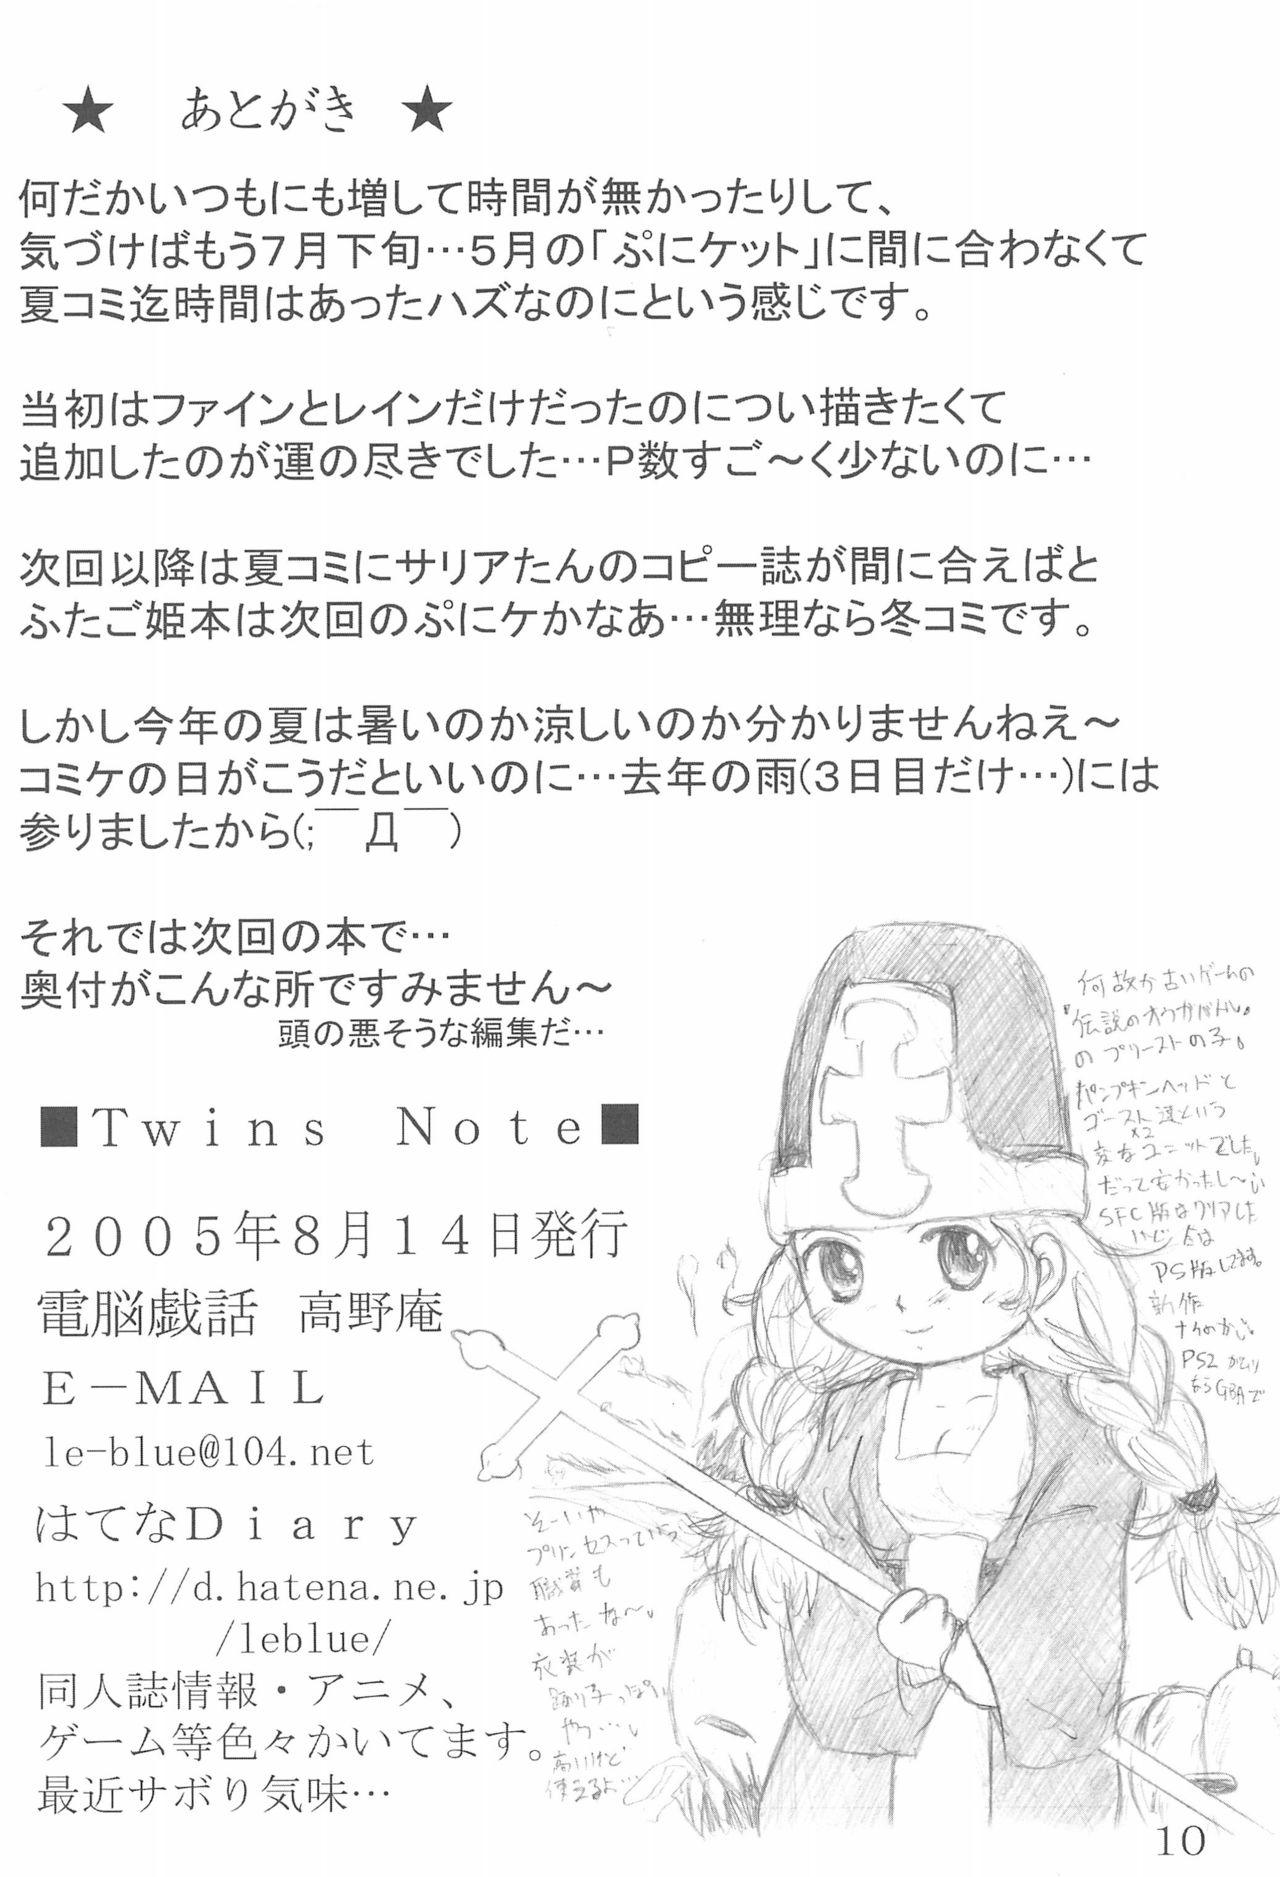 Twins Note 11